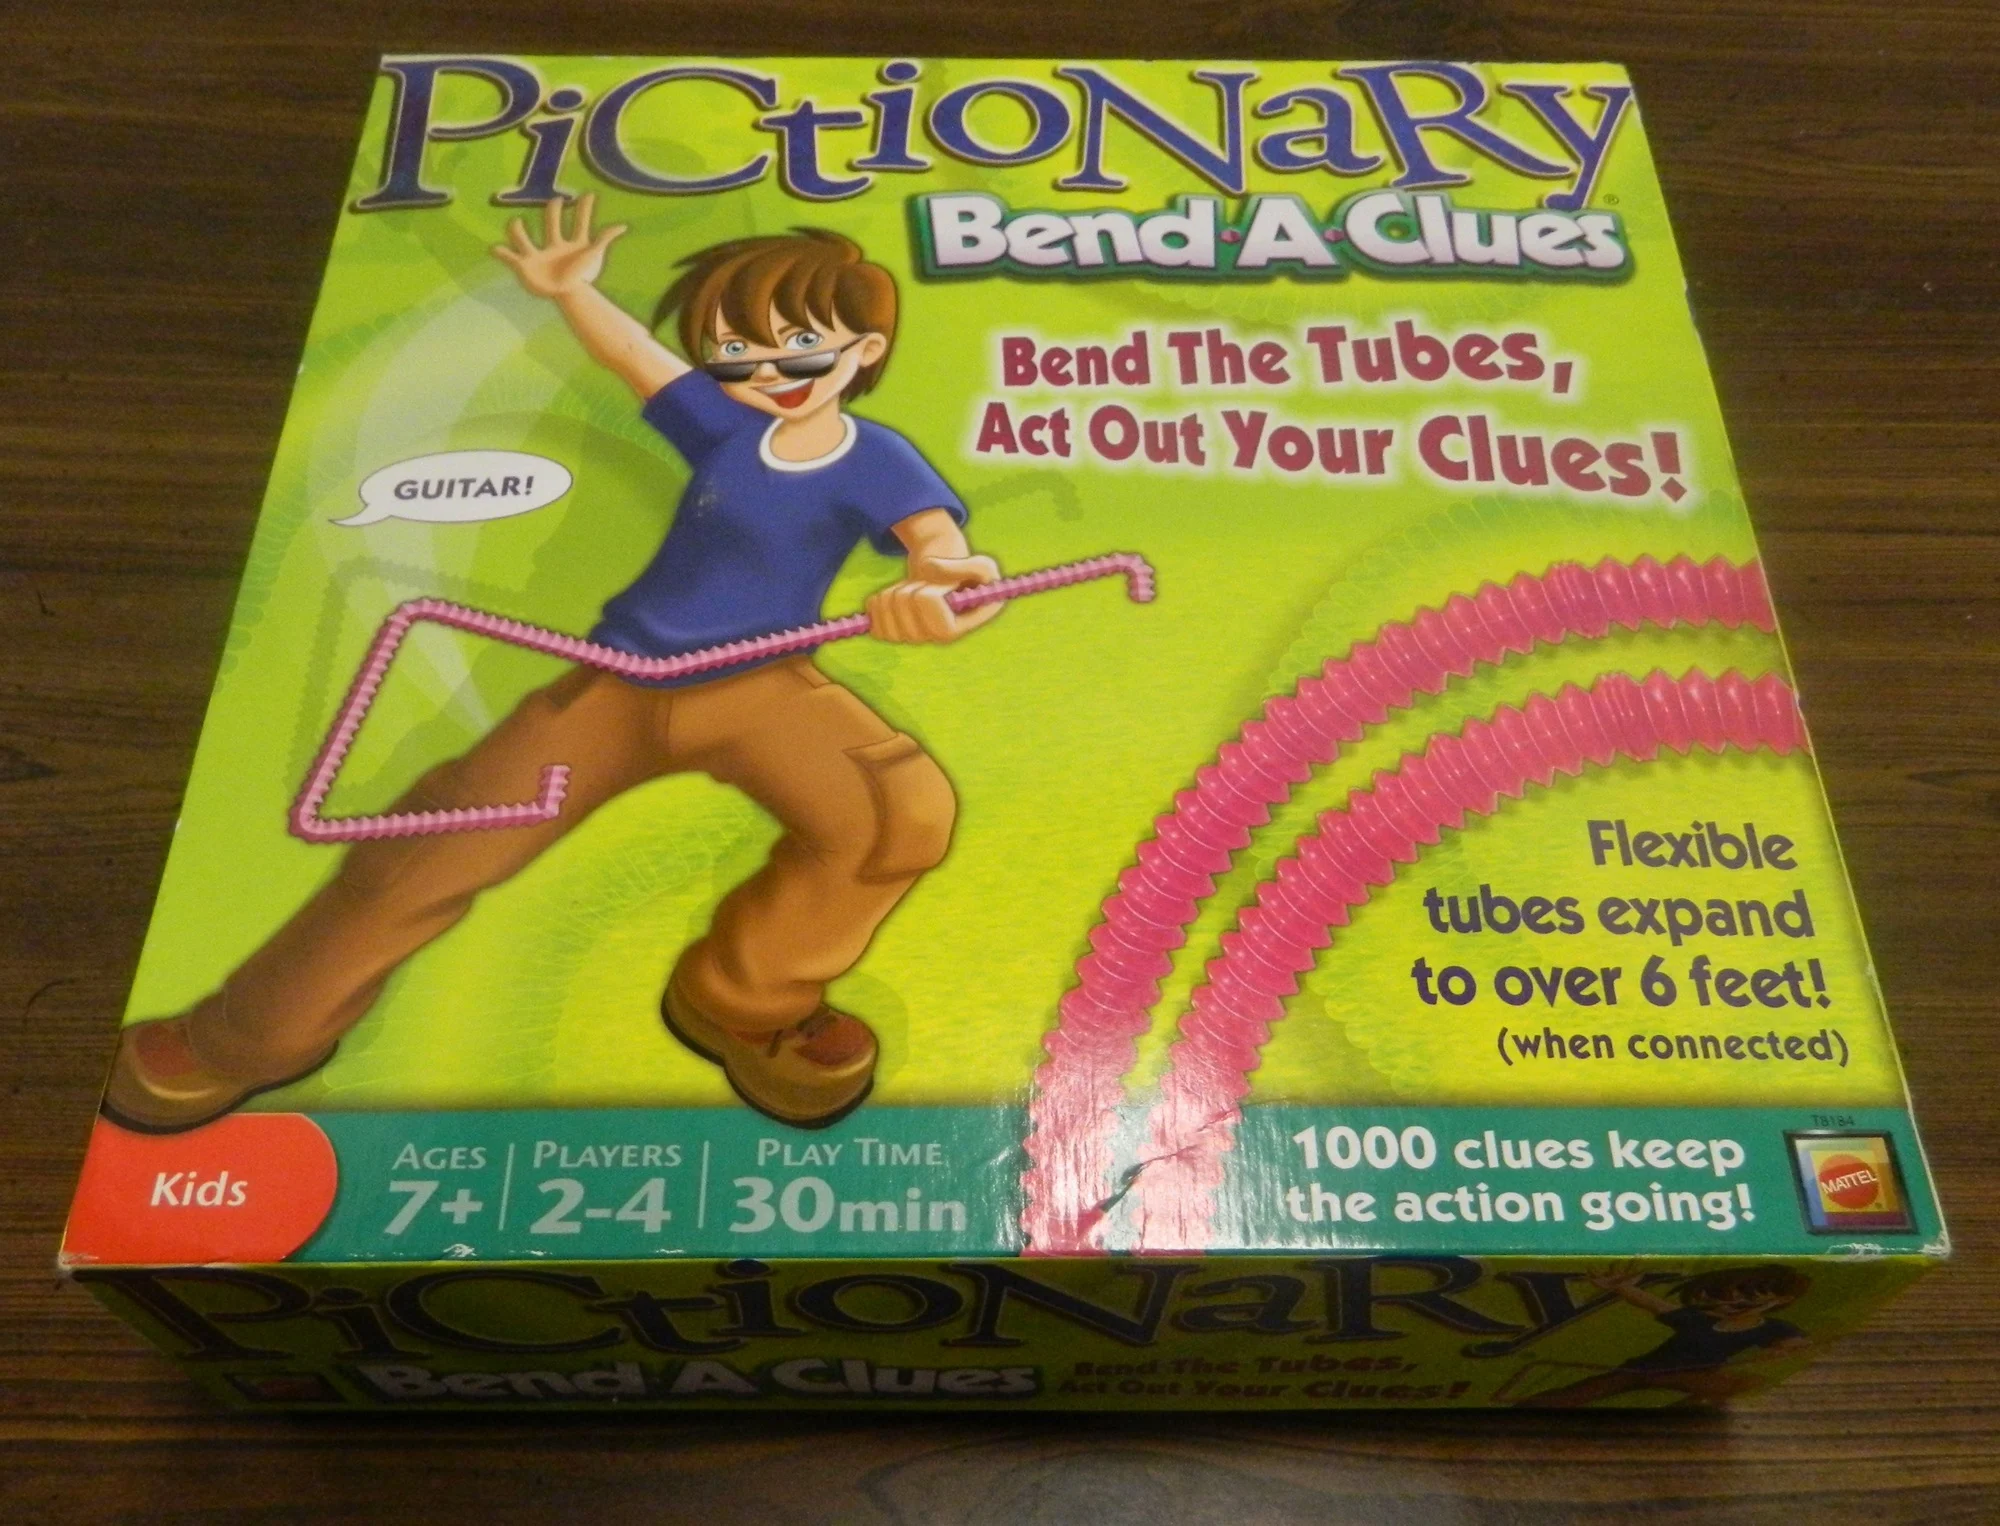 How to Play Pictionary: The Ultimate Game Guide